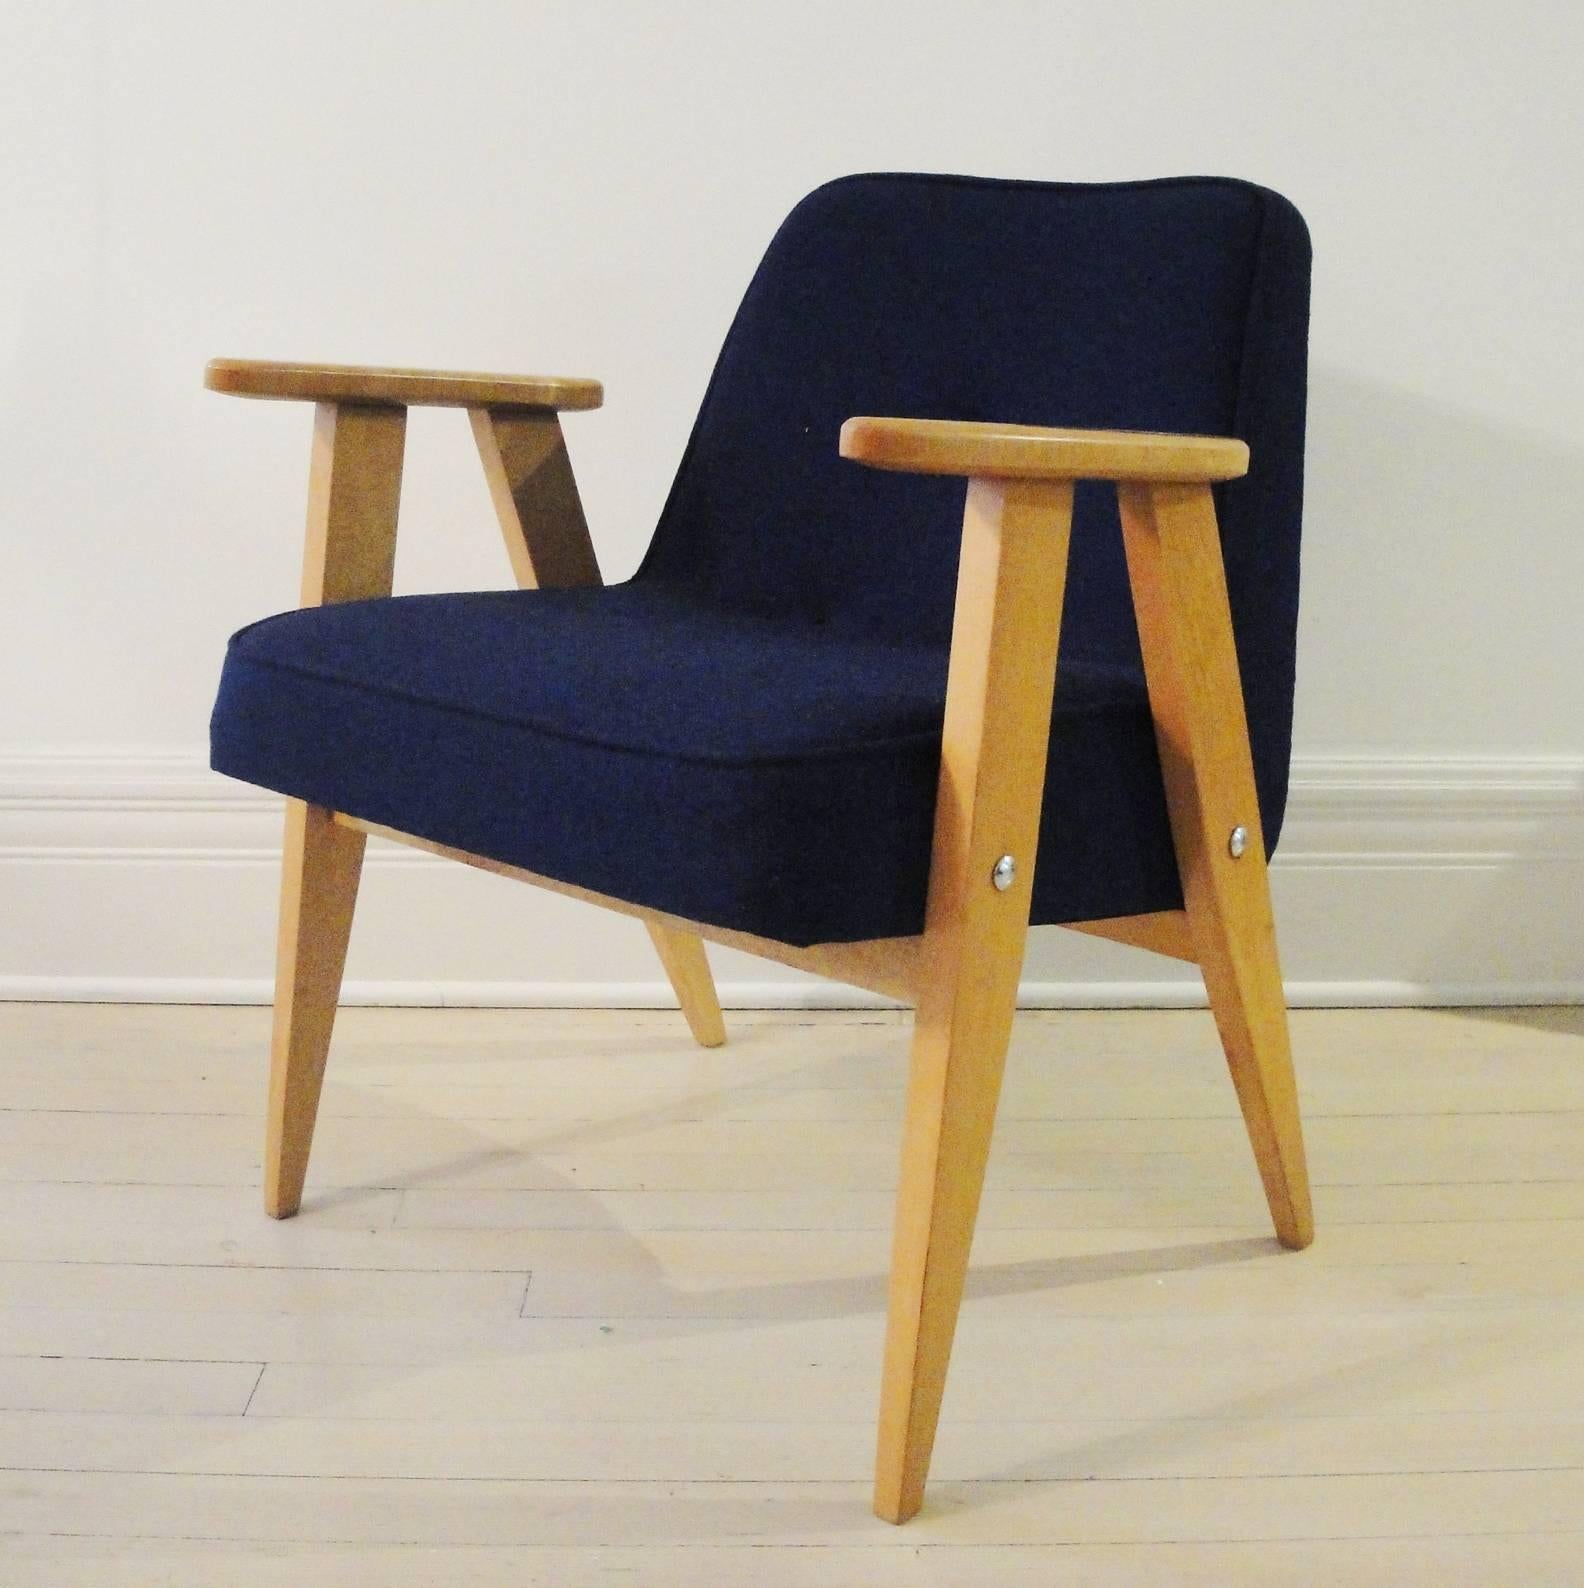 Armchair model no. 366 designed by Jozef Chierowski in 1962.
Ash wood, newly upholstered Kvadrat dark blue fabric. Simple line, very comfortable. Recently published in French "Elle Decor".